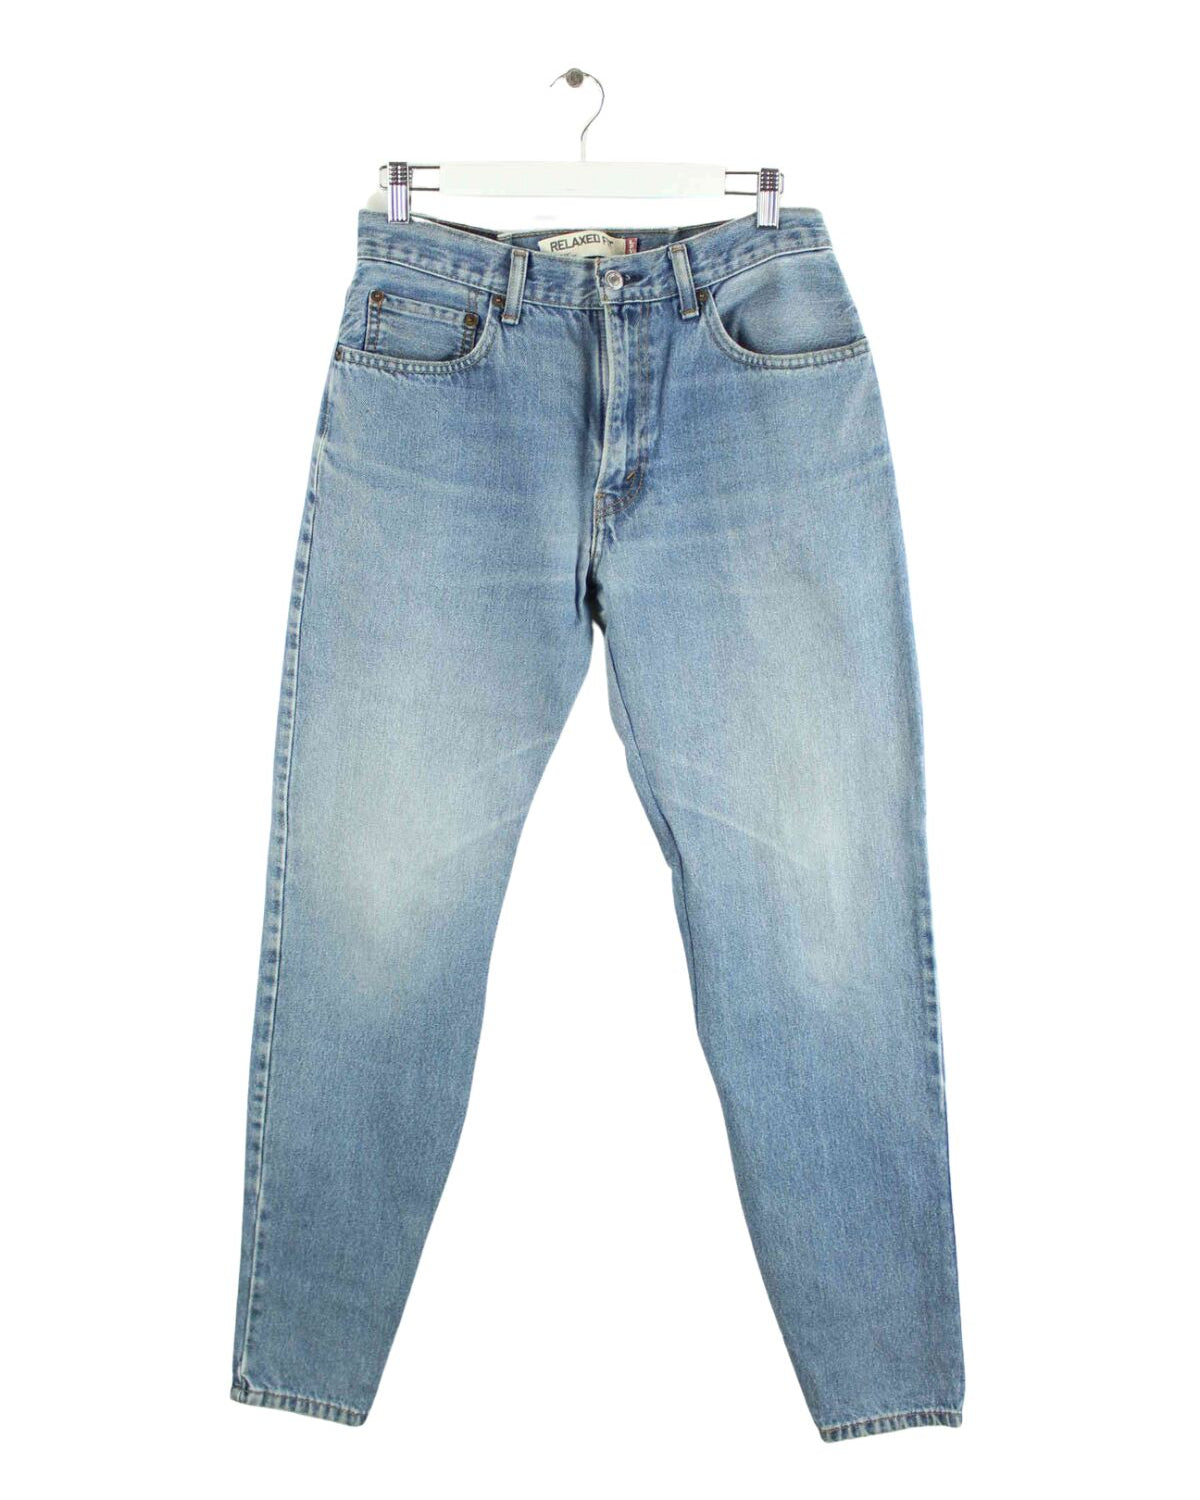 Levi's 550 Relaxed Fit Jeans Blau W30 L32 (front image)